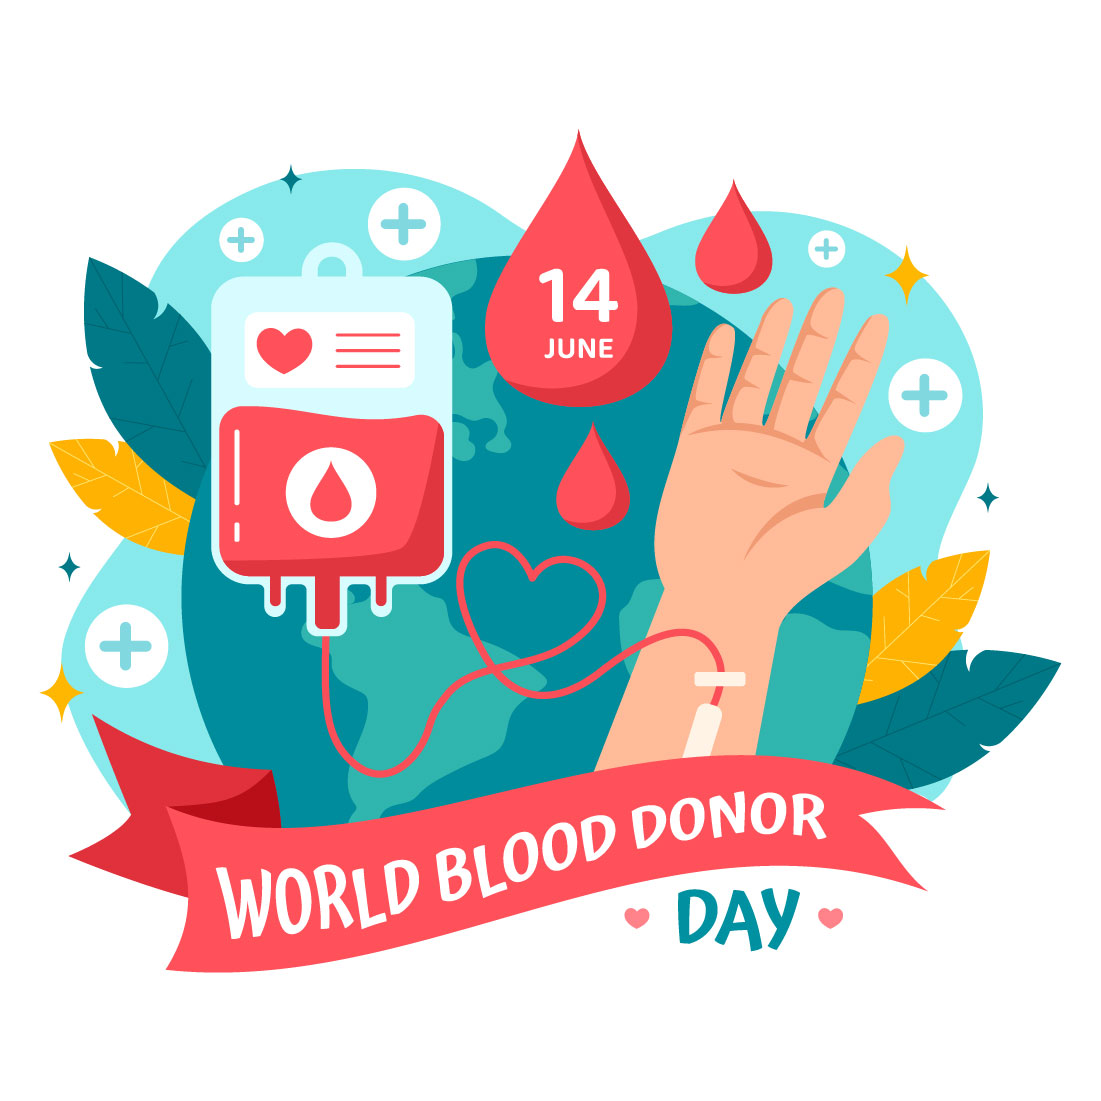 12 World Blood Donor Day Illustration preview image.